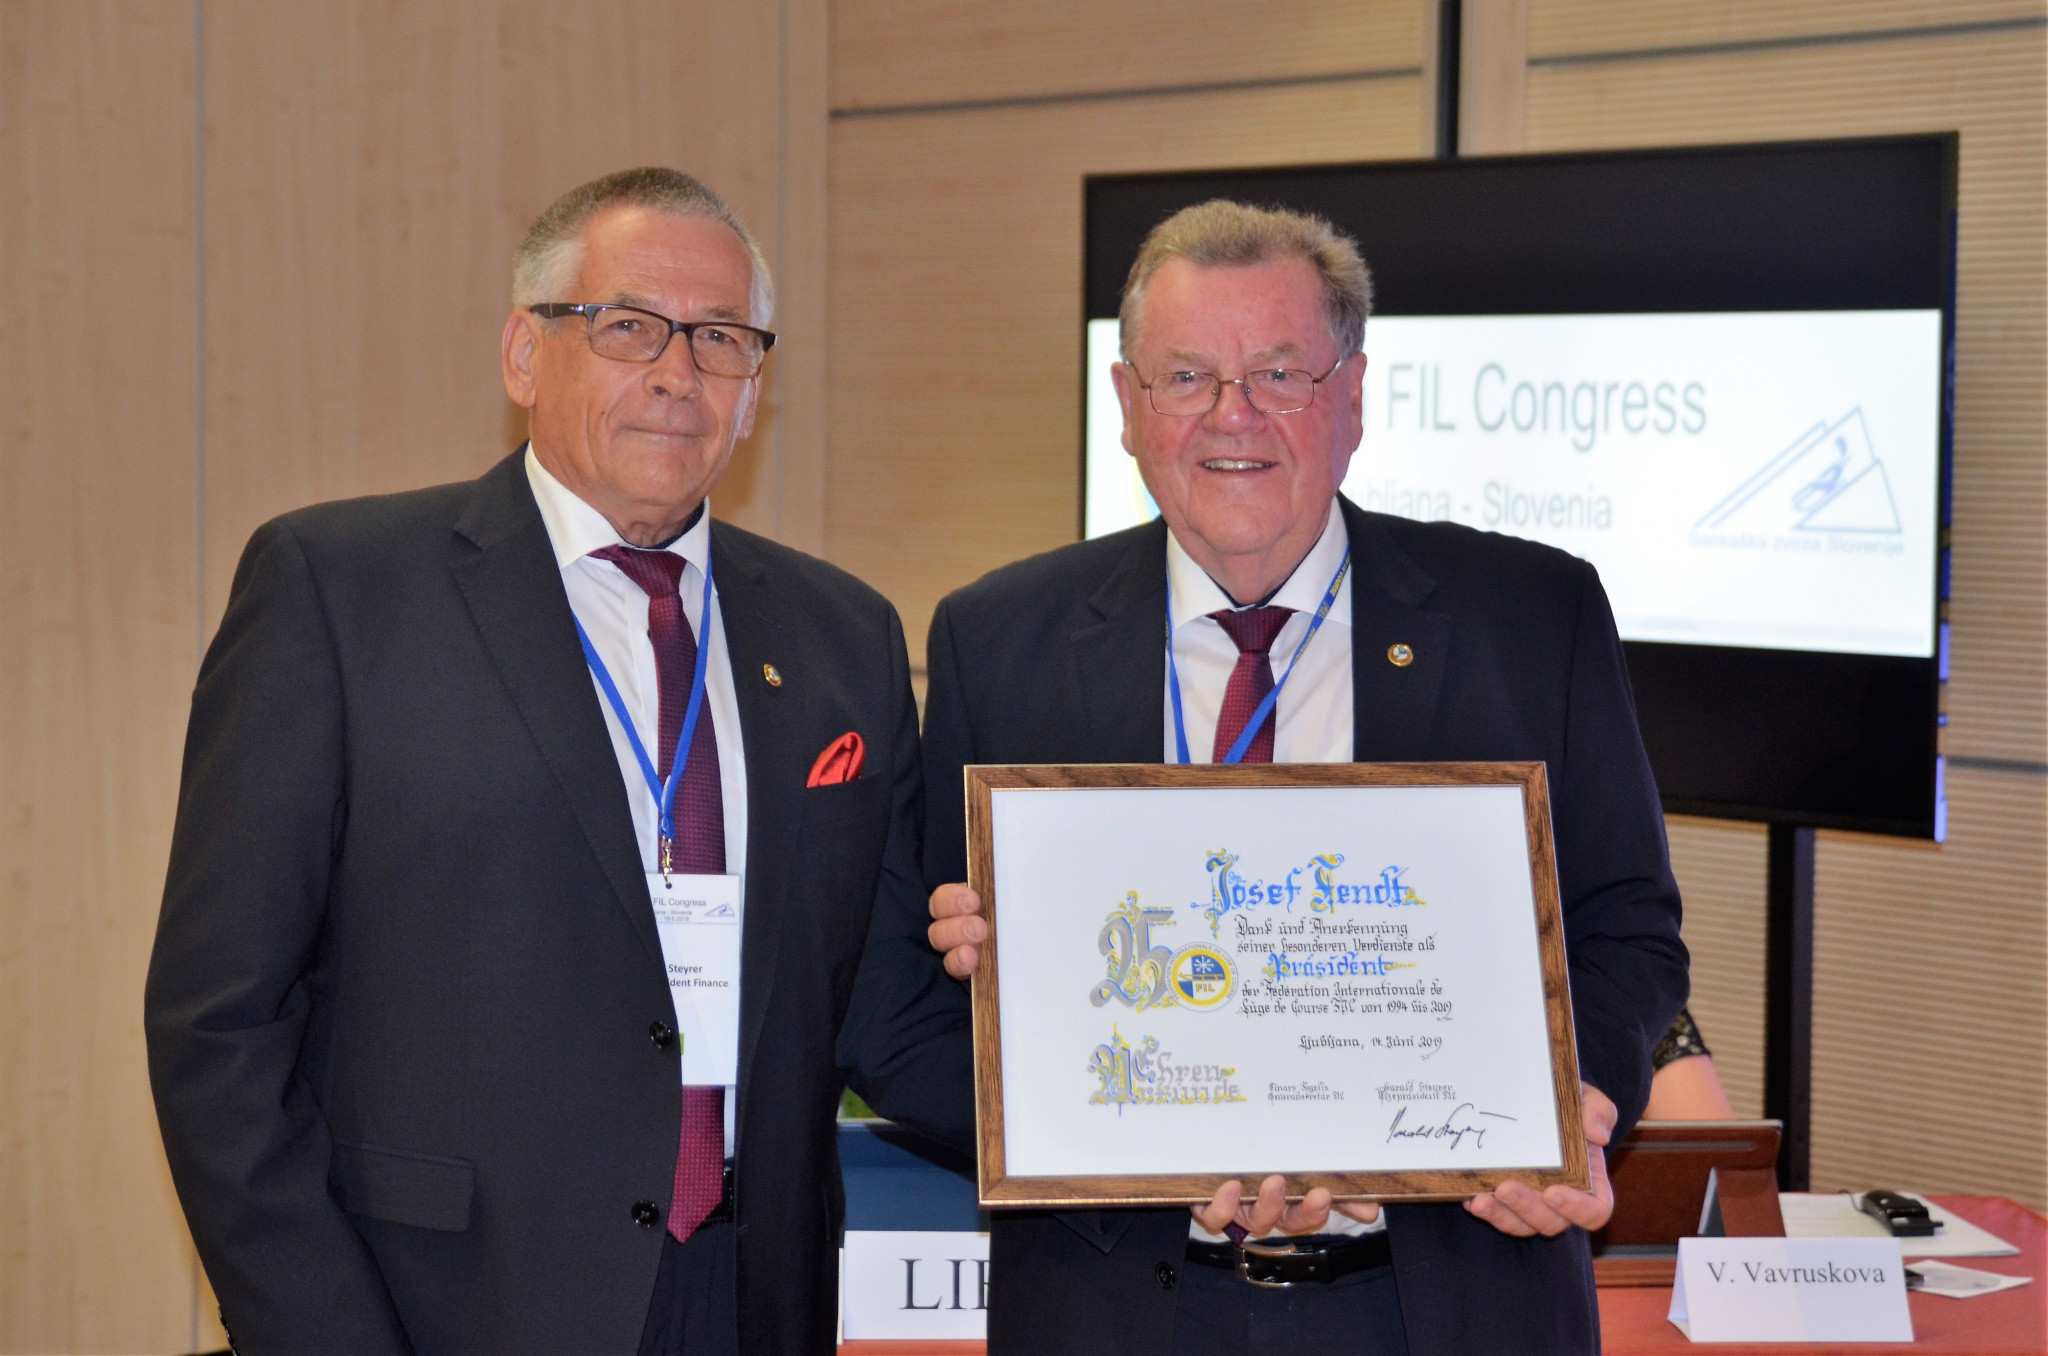 Fendt celebrates 25-year anniversary as President of International Luge Federation